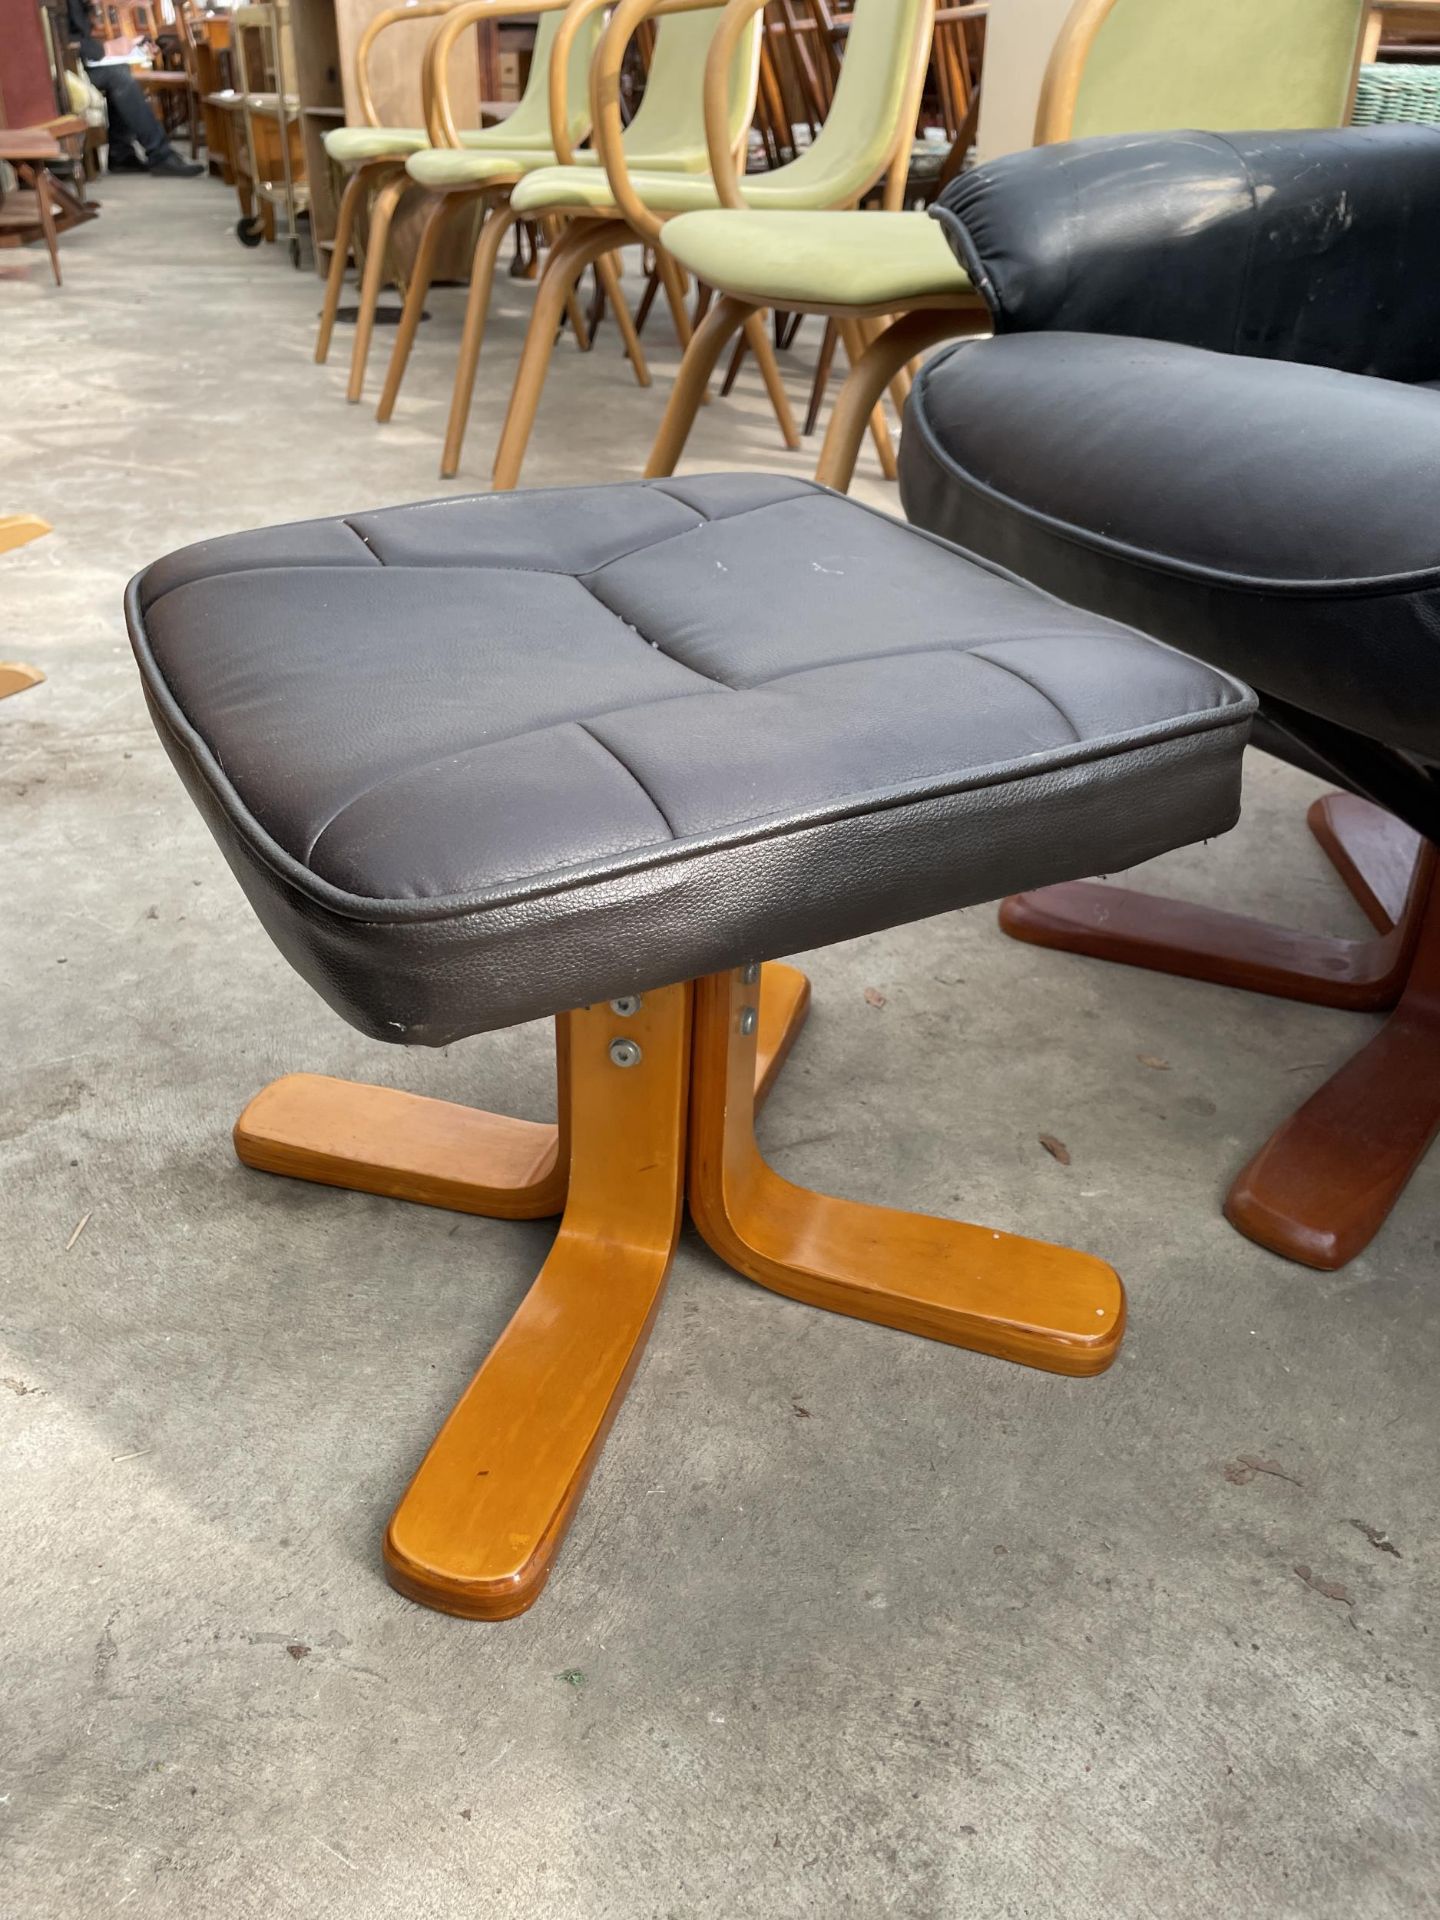 A FAUX BLACK LEATHER SWIVEL RECLINING CHAIR AND STOOL - Image 3 of 3